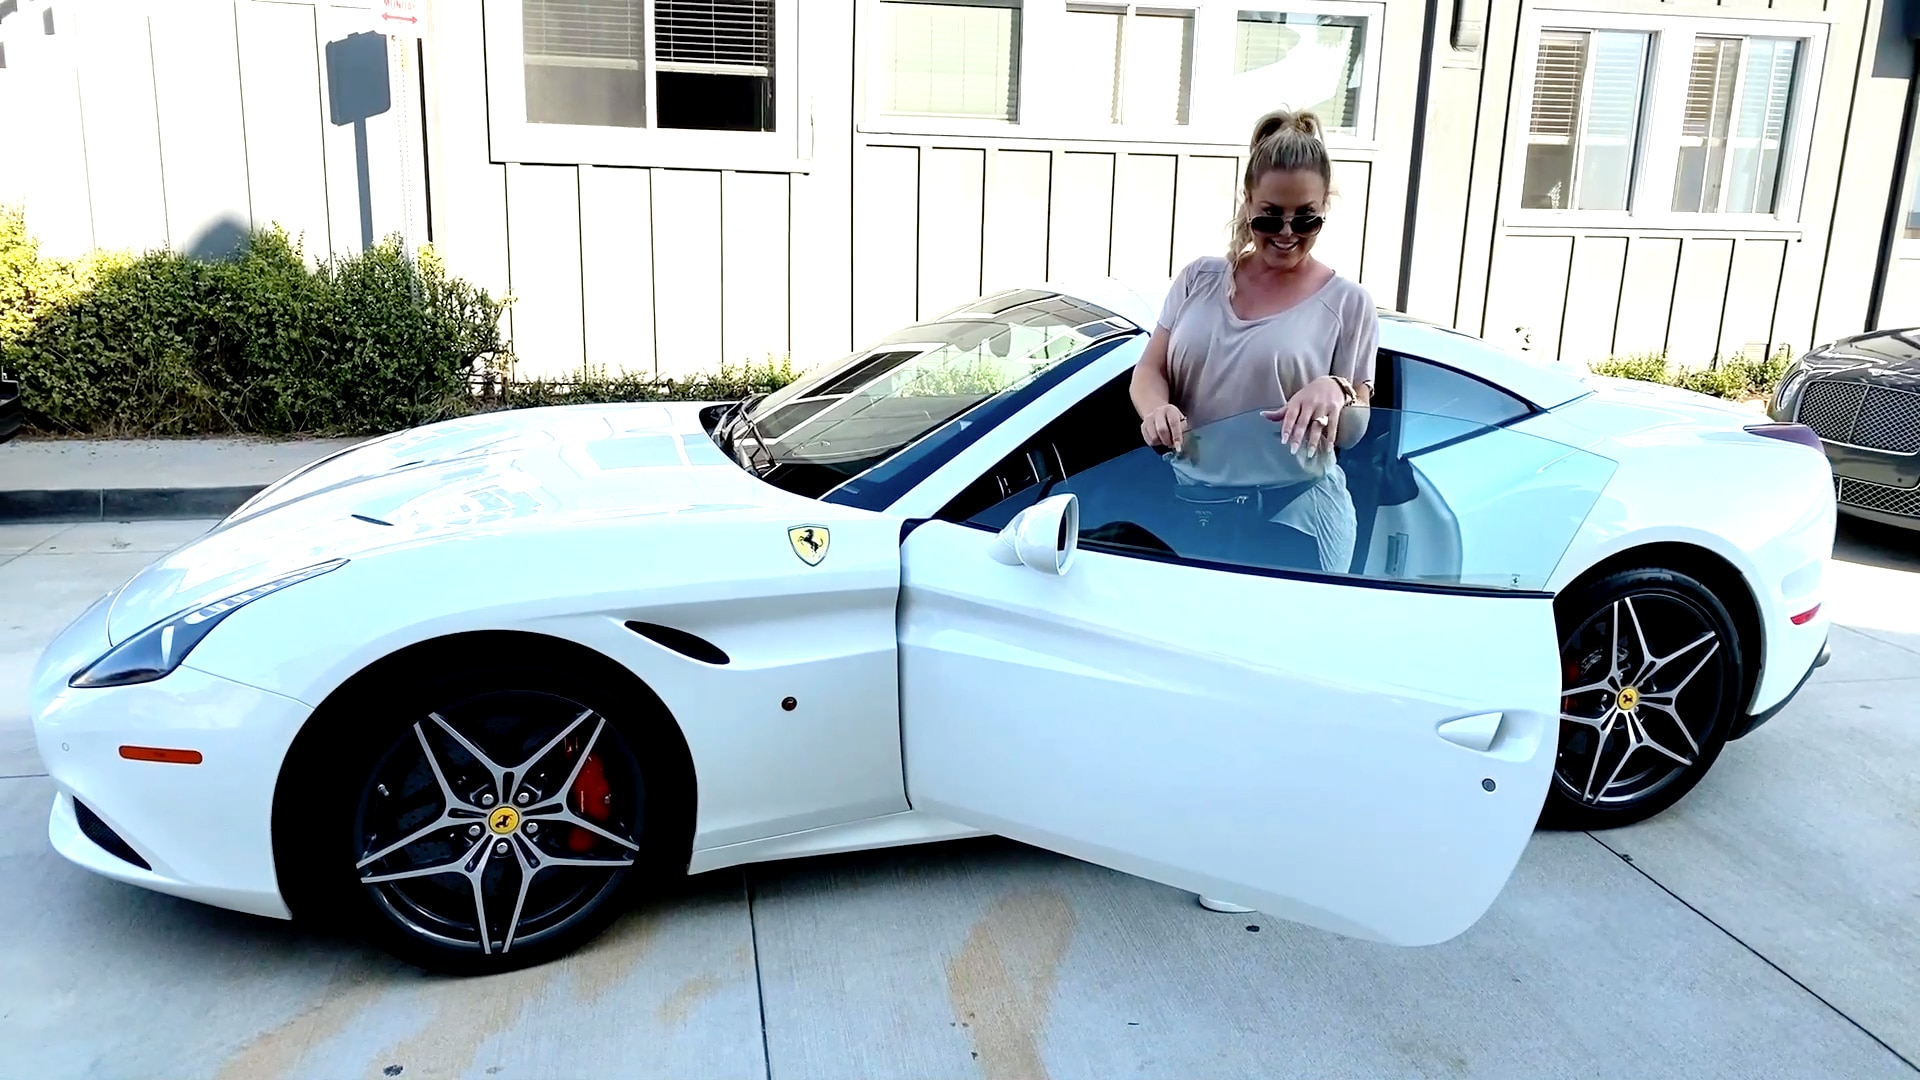 Watch Elizabeth Lyn Vargas Is a Car Addict – Here's Her Latest Purchase | The Real Housewives of Orange County Season 15 Video